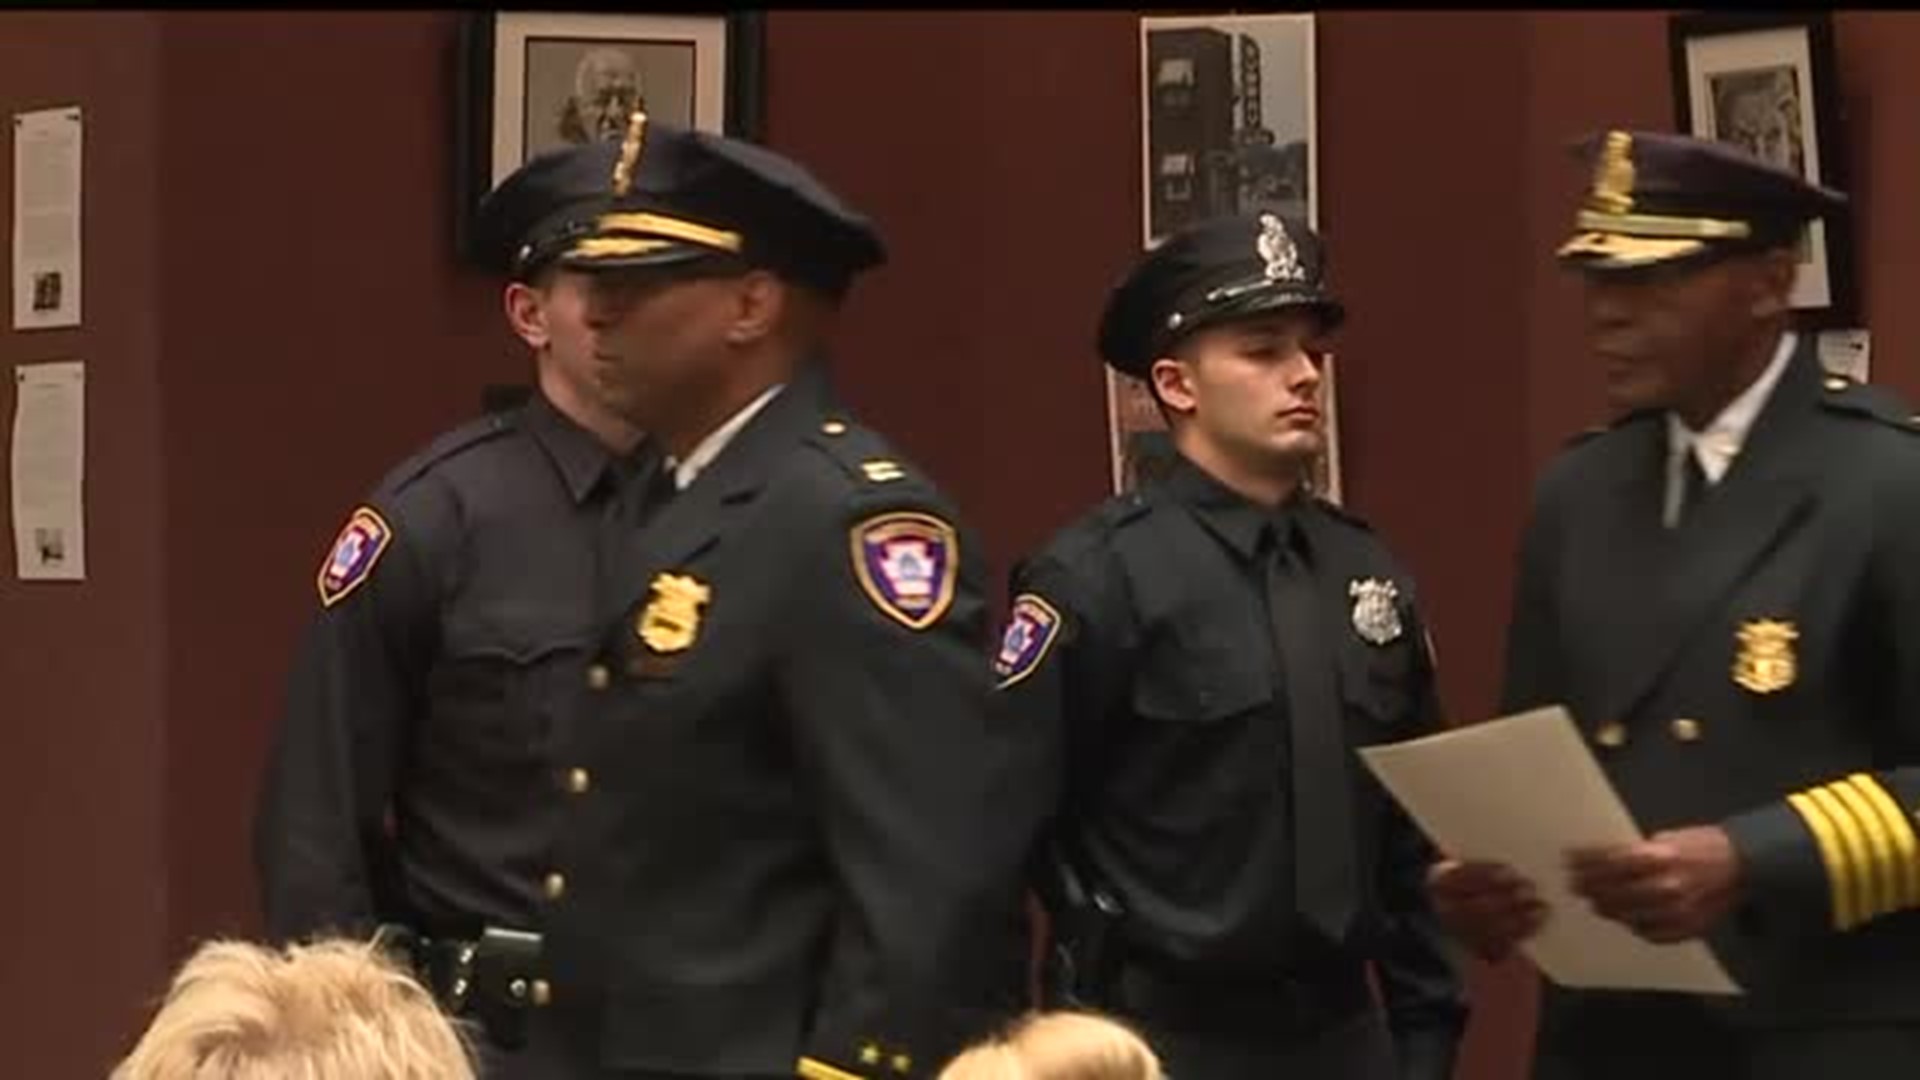 Award ceremony for Harrisburg Police Officers